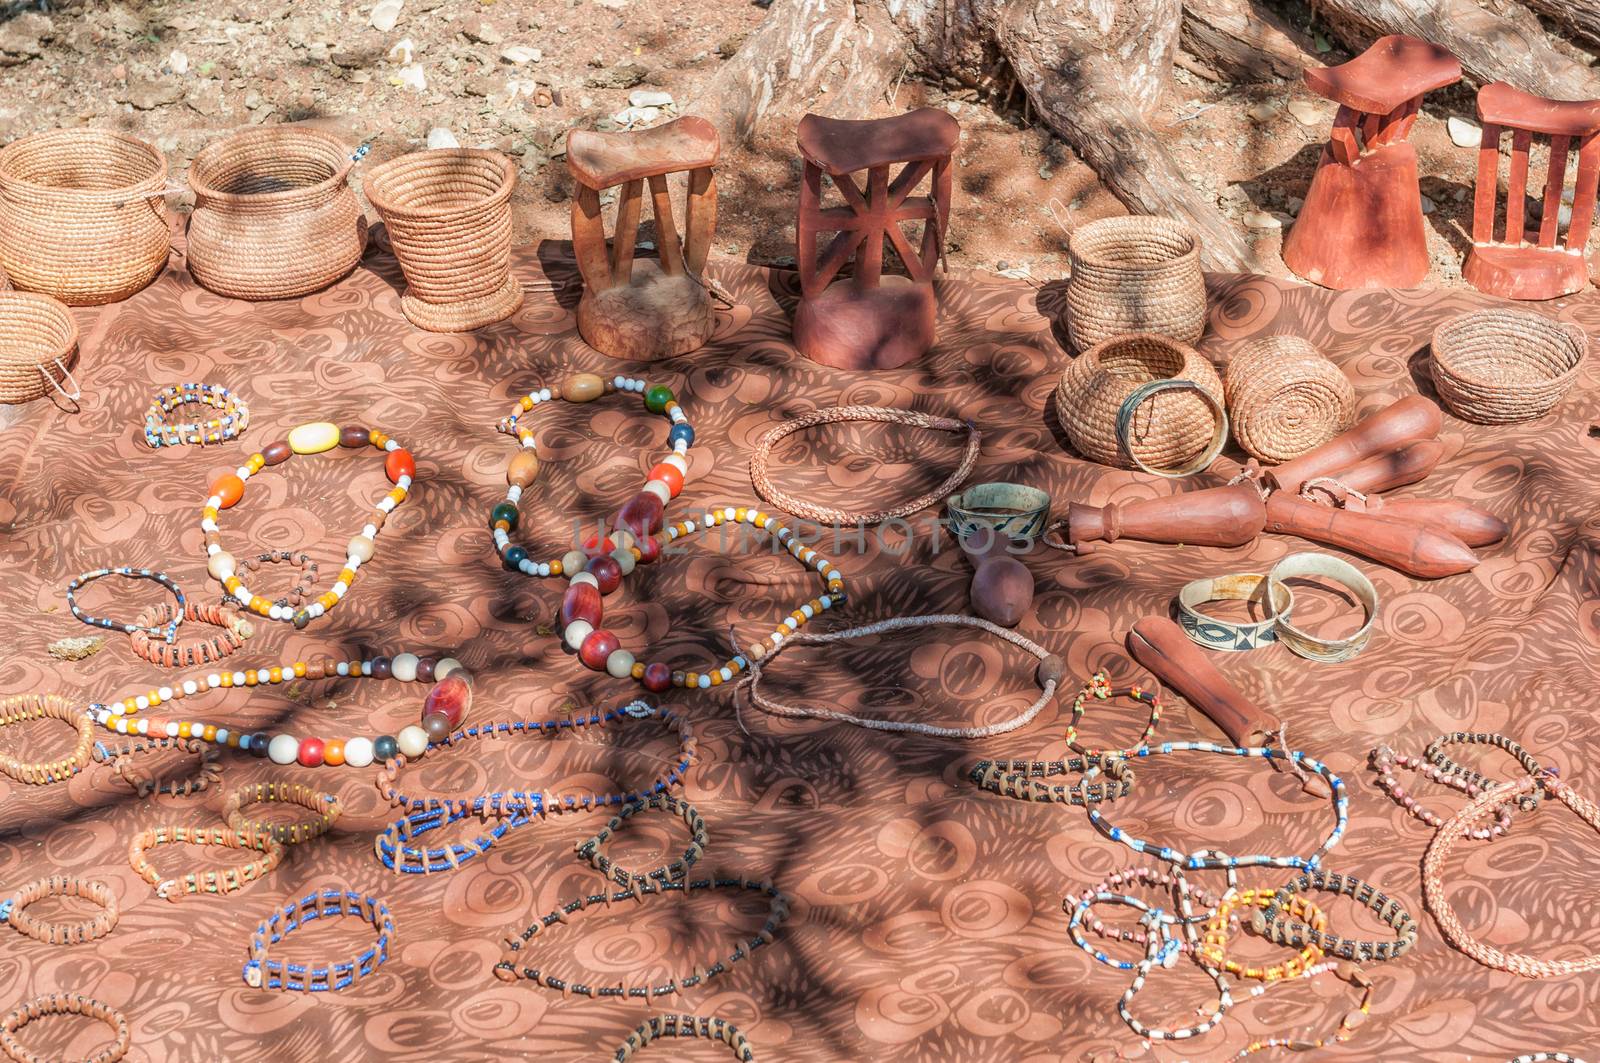 Himba arts and crafs for sale at a Himba village  by dpreezg